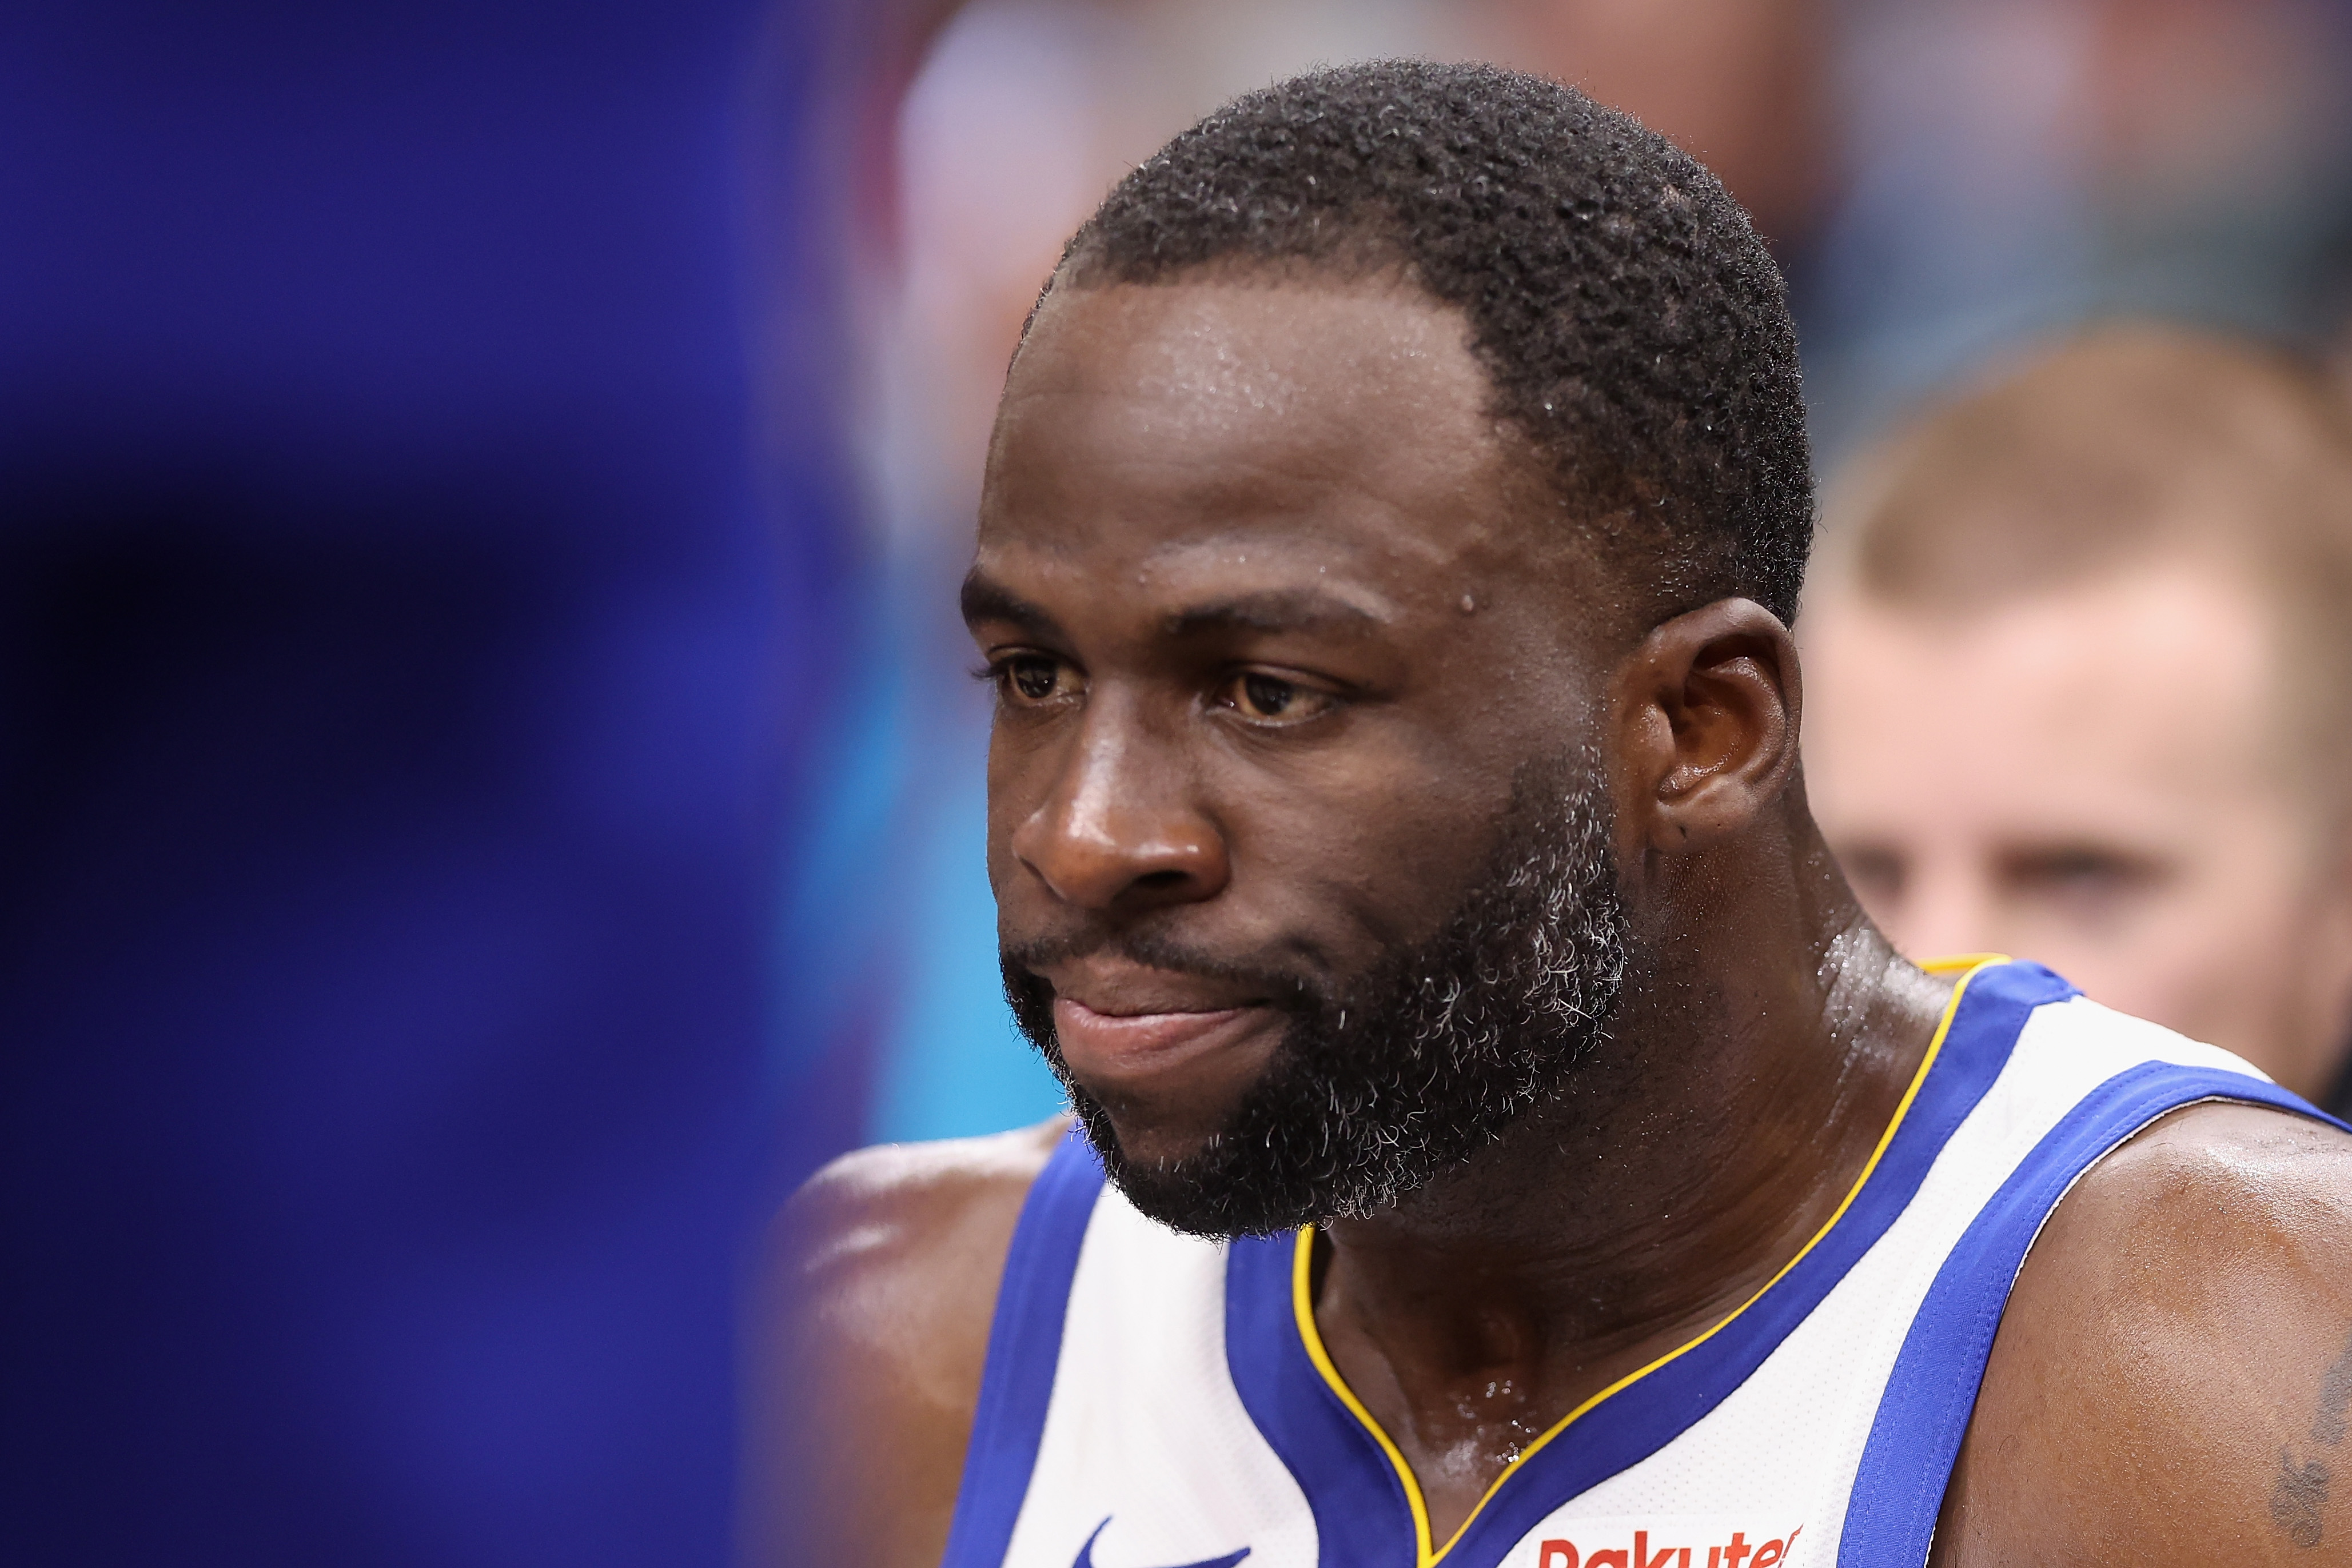 Police offer first-round draft pick for Draymond Green